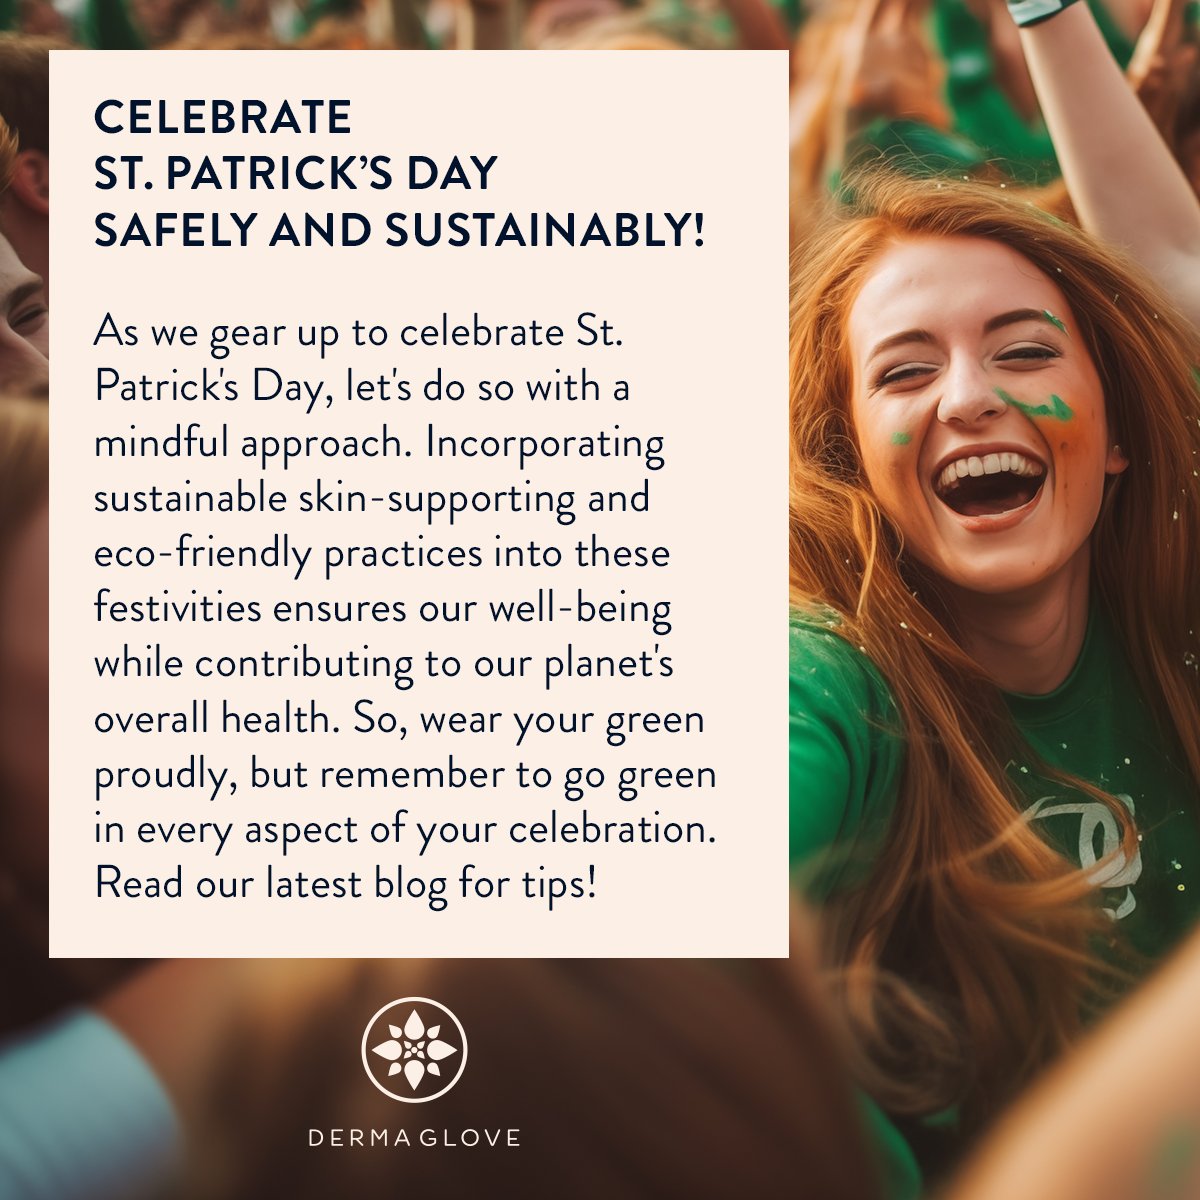 Let's raise a glass to a safe and sustainable St. Patrick's Day celebration! 🌈♻️🍀 Let's keep the luck o' the Irish going by partying responsibly and respecting our planet! #StPatricksDay #GreenCheers

dermaglove.com/blog/celebrate…